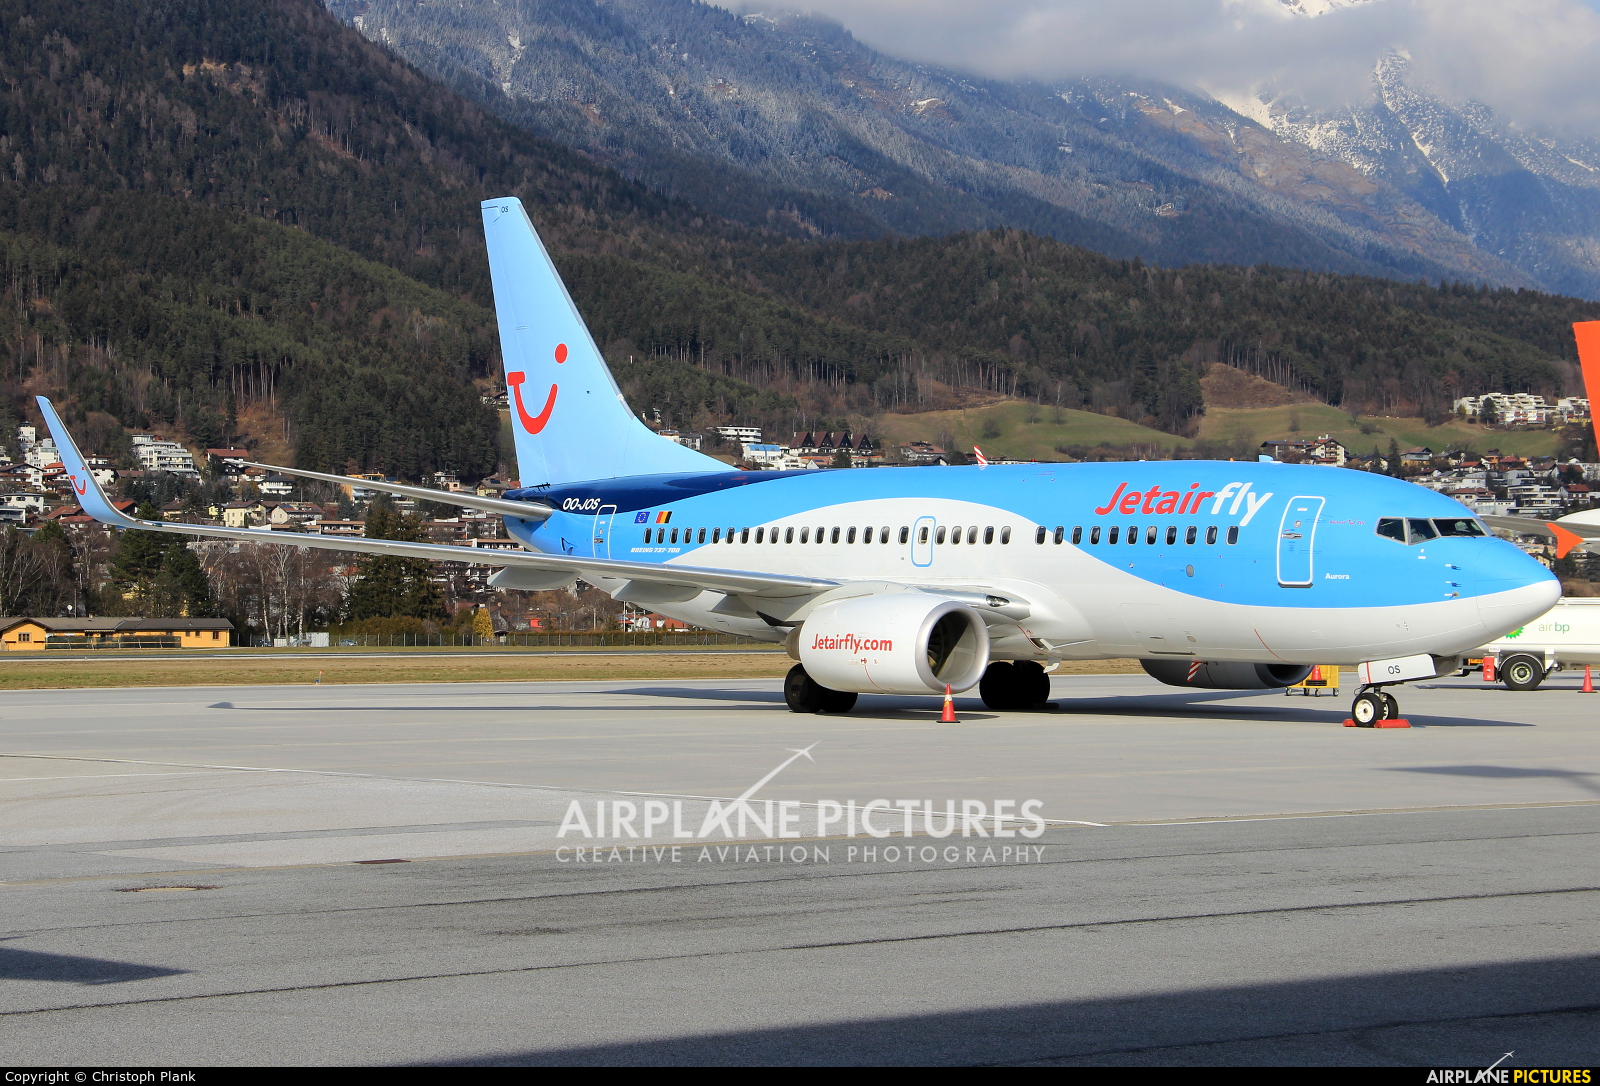 Jetairfly (TUI Airlines Belgium) OO-JOS aircraft at Innsbruck